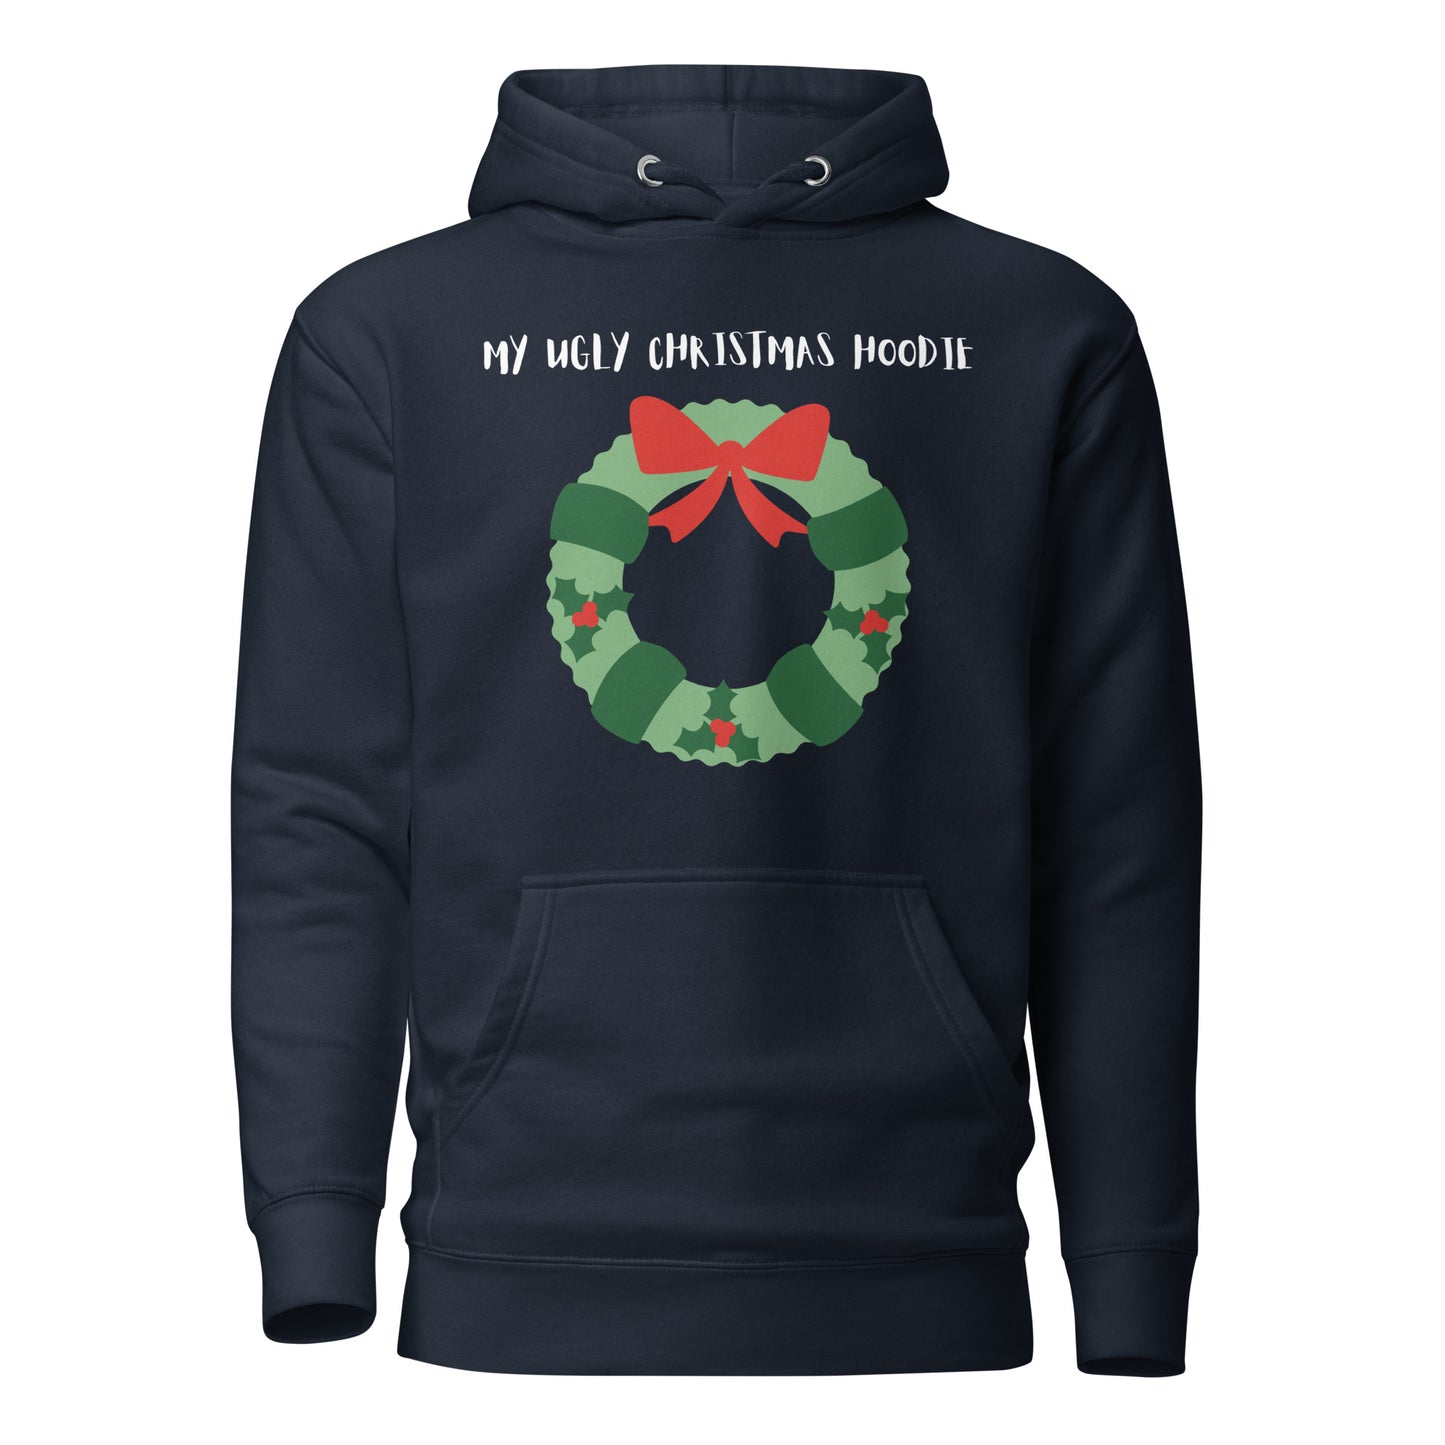 My Ugly Christmas Hoodie Unisex Hoodie, Christmas Gifts, Ugly Christmas Sweater, Ugly Christmas Hoodie, Christmas Clothes